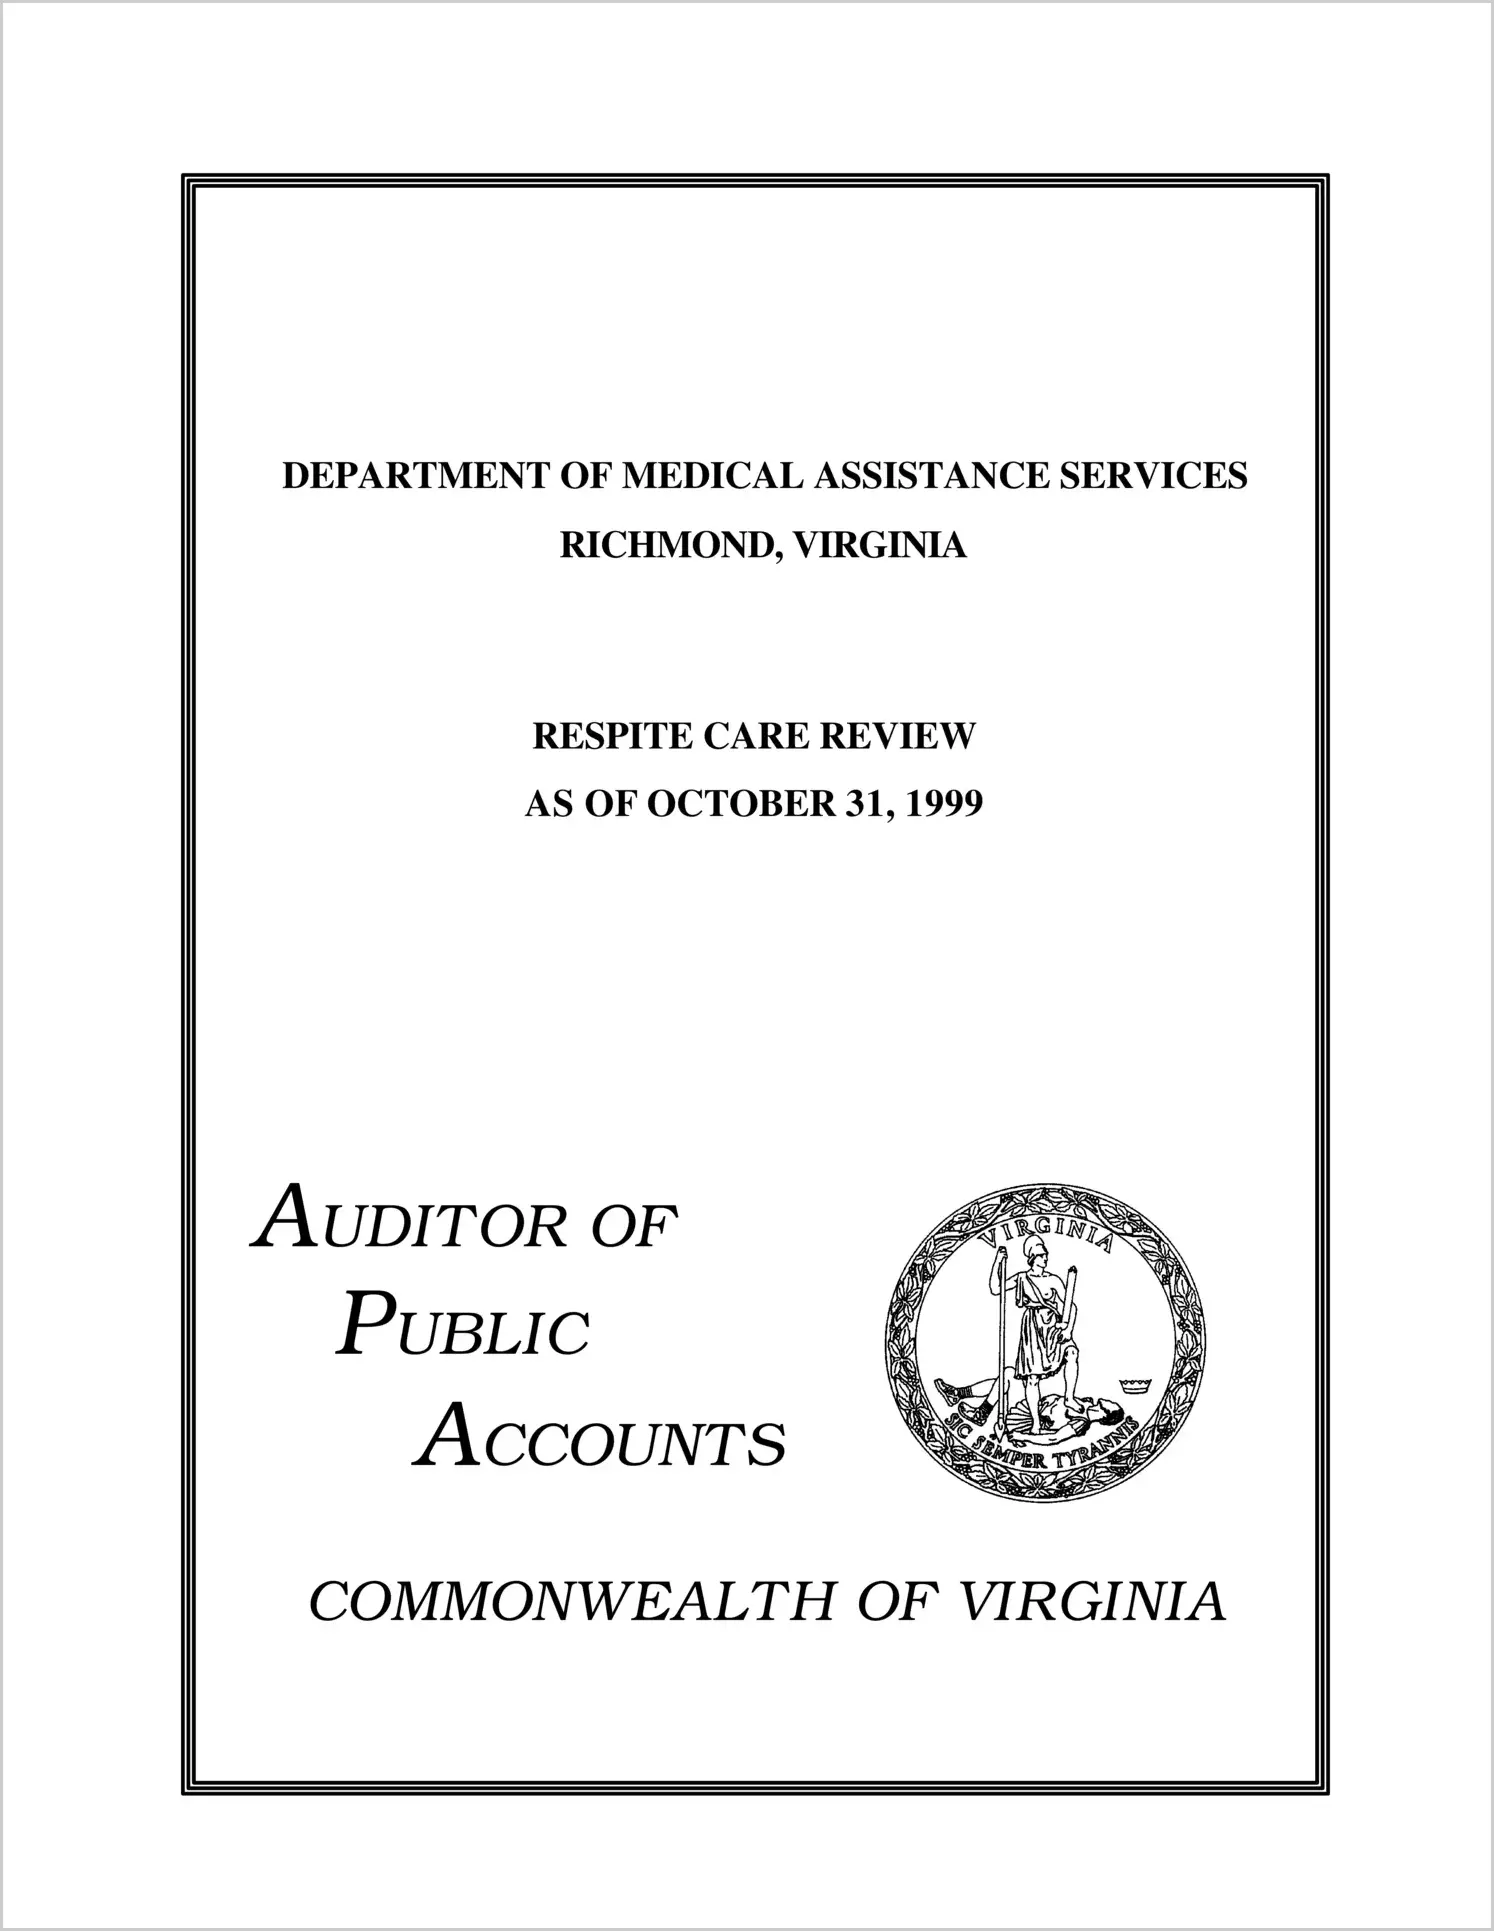 Department of Medical Assistance Services Respite Care Review as of October 31, 1999